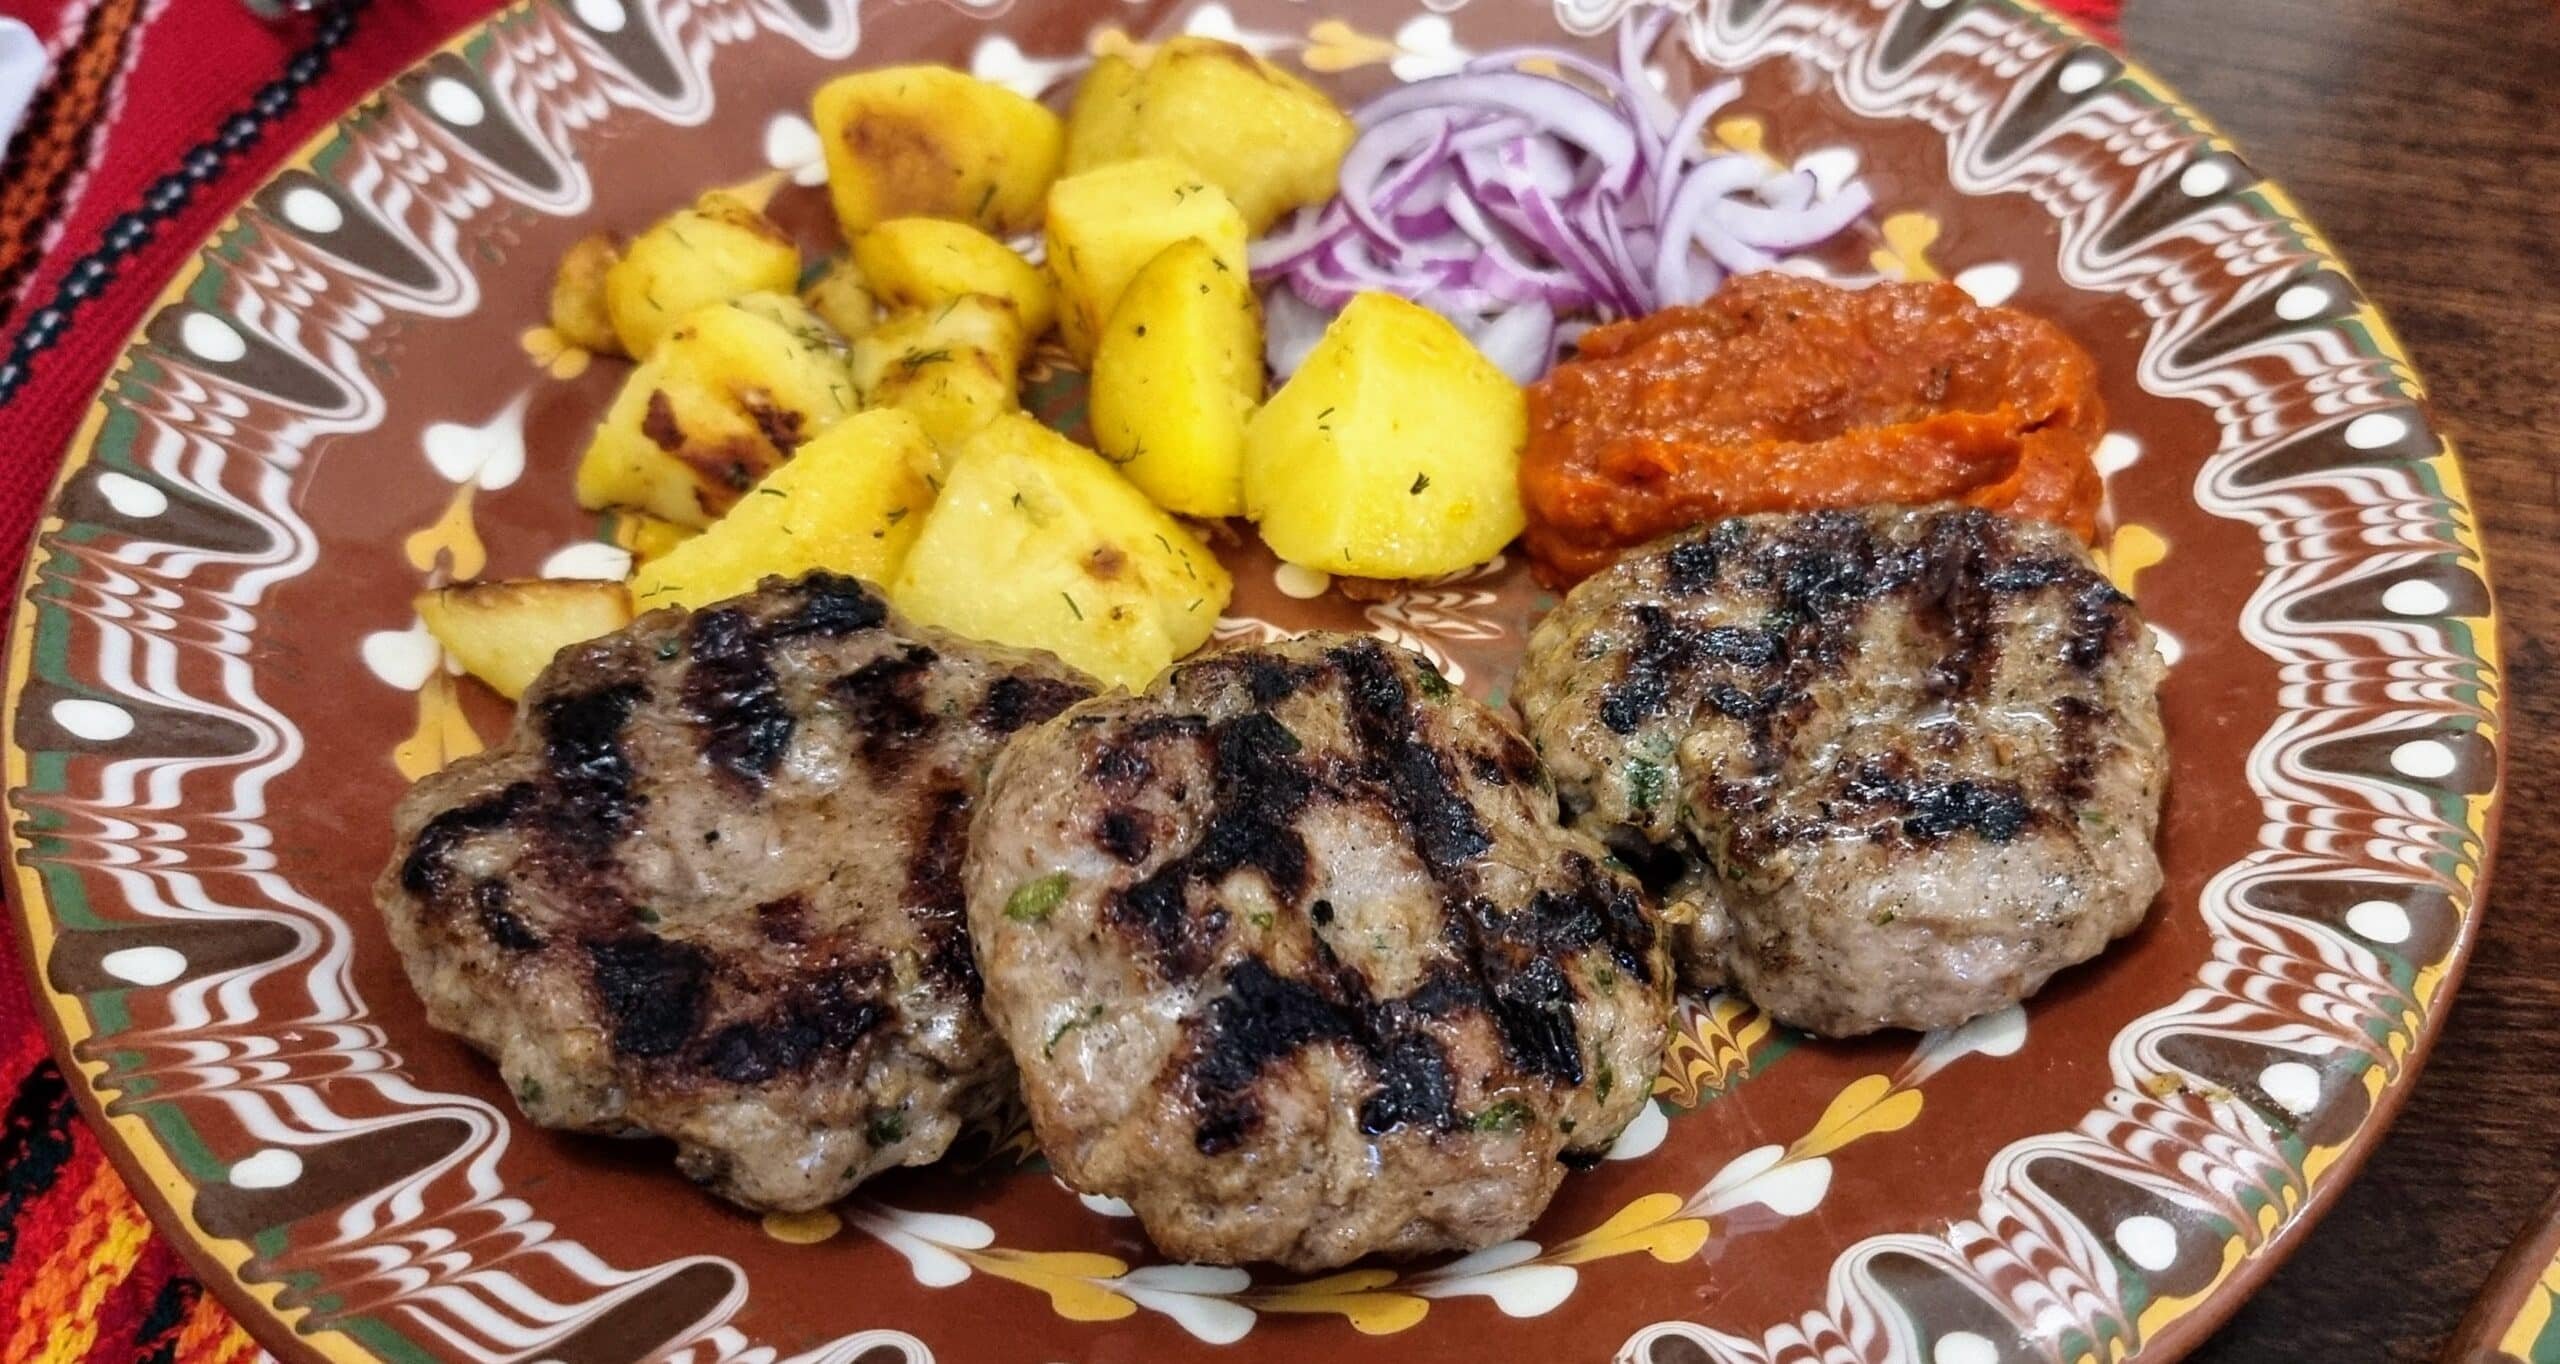 A plate of Bulgarian Kofte, potatoes and onions - a favorite dish in Bulgaria.